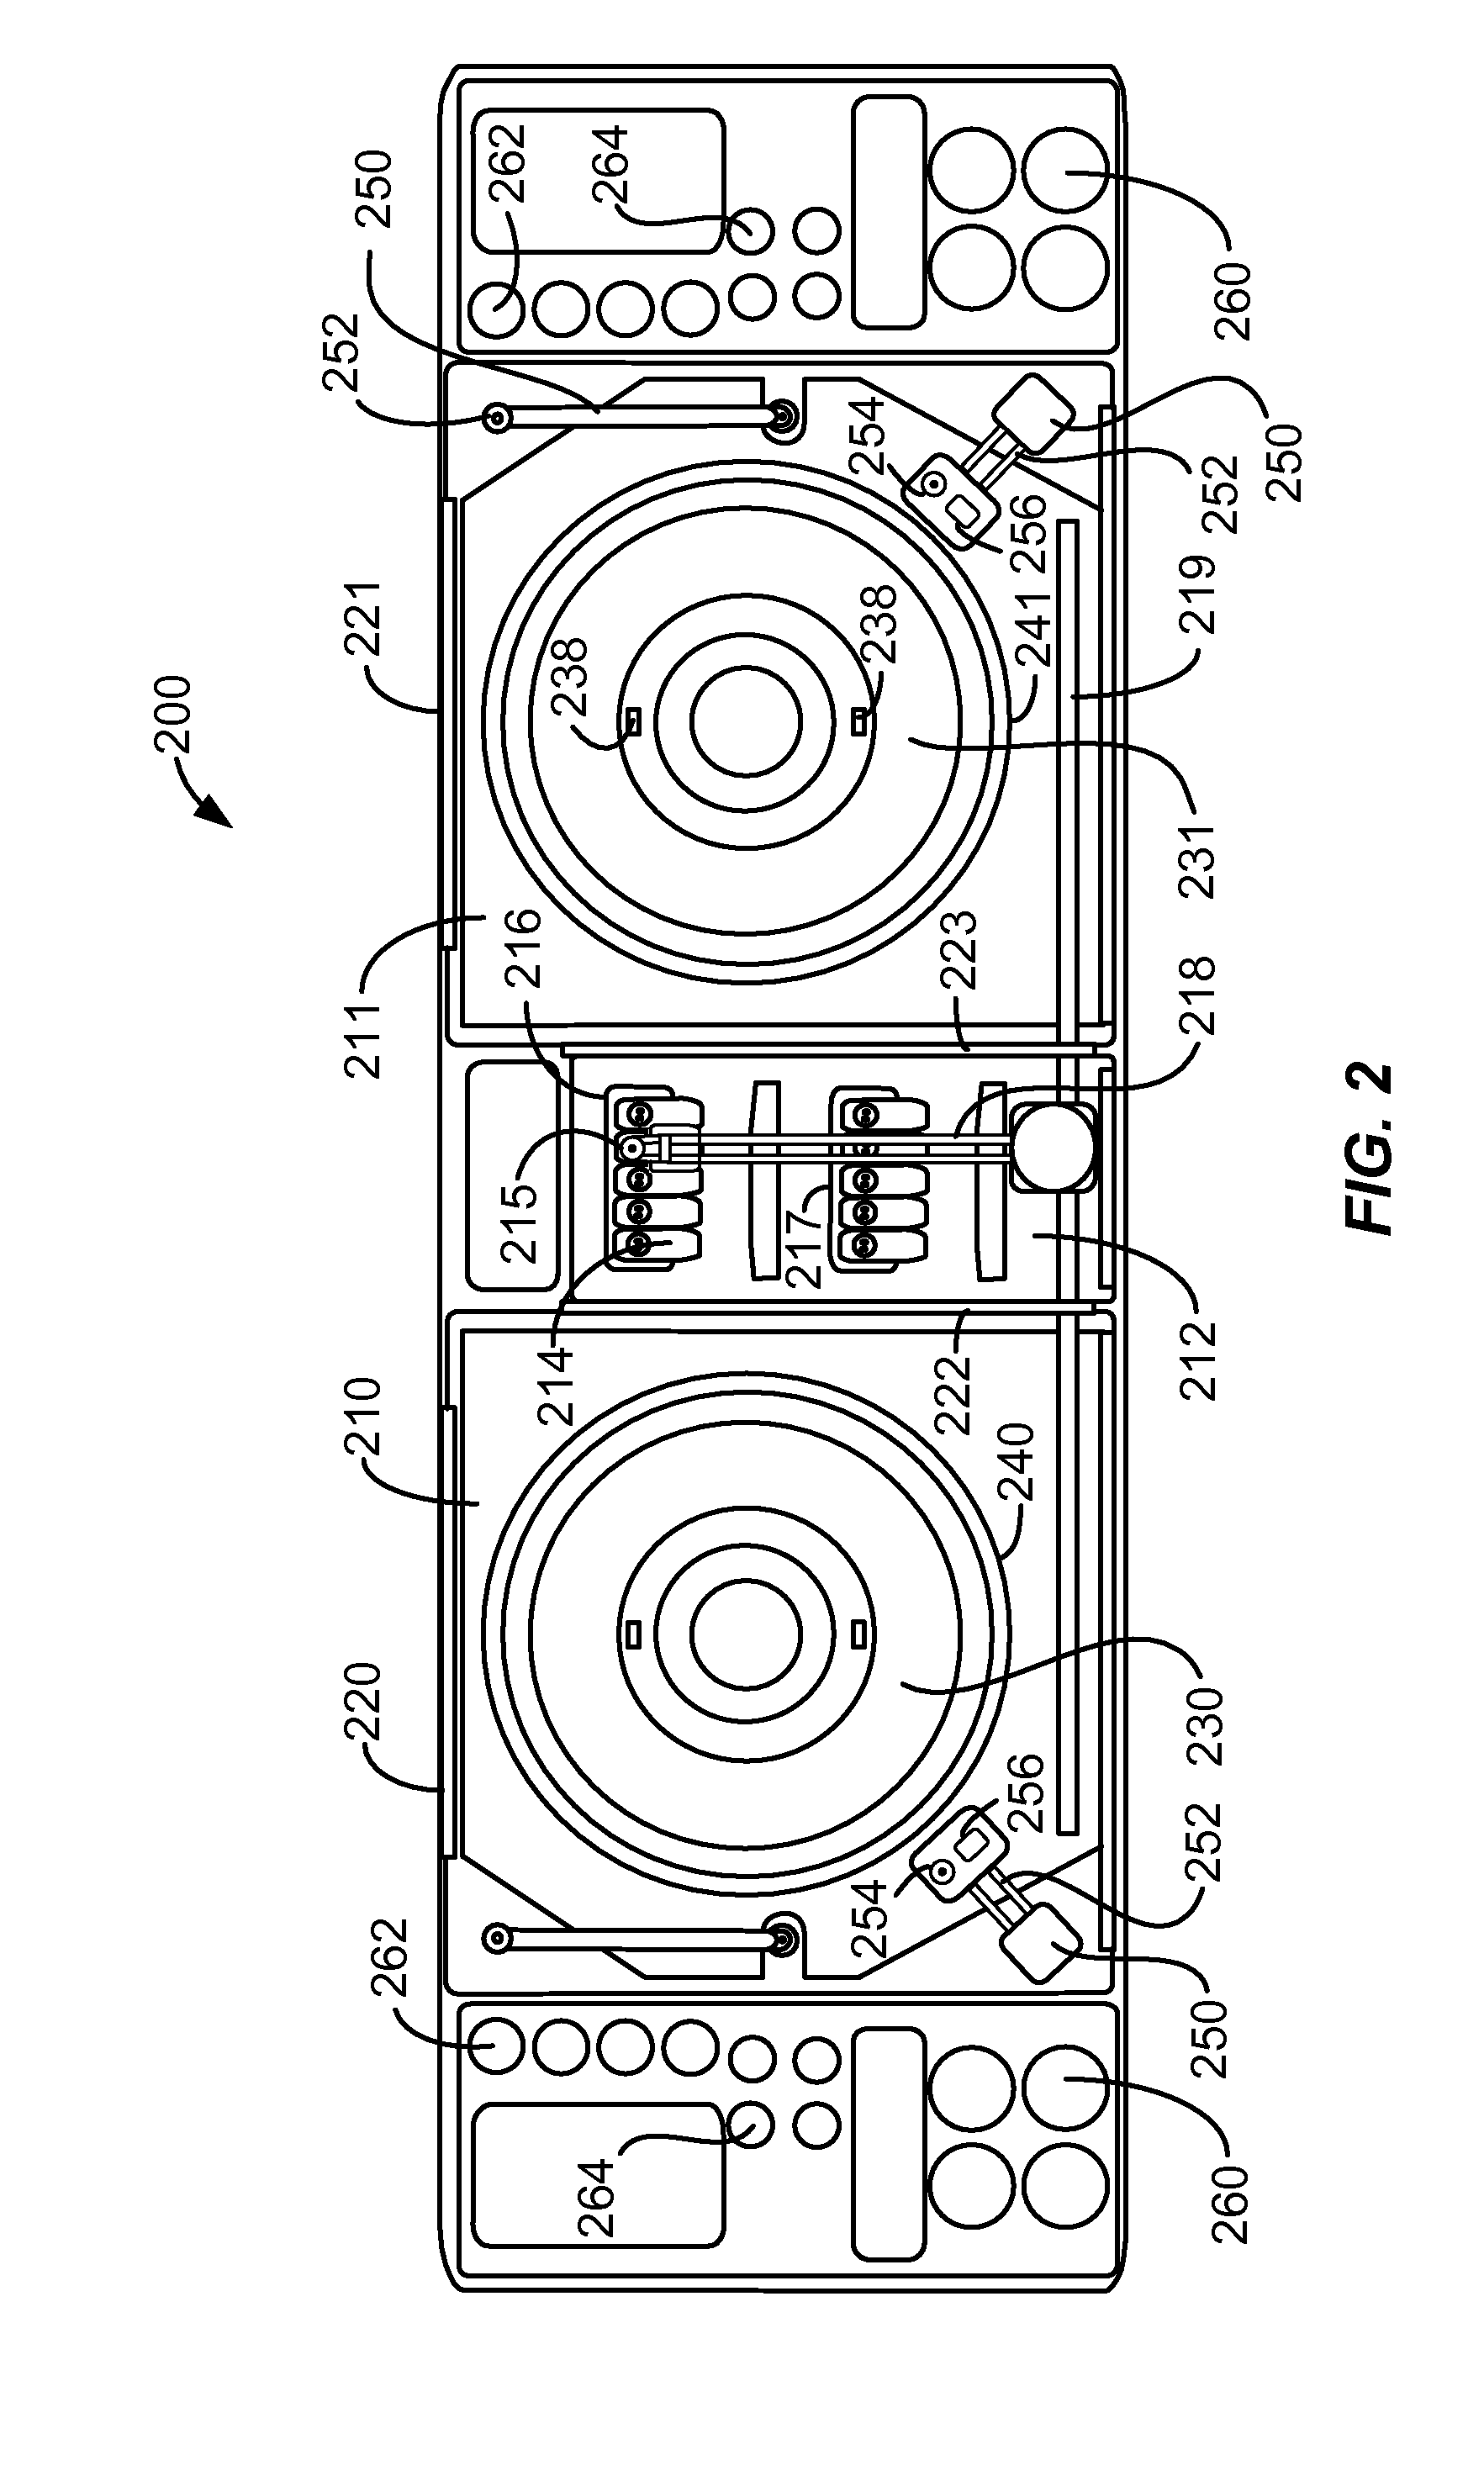 Method and system for detection of wafer centering in a track lithography tool